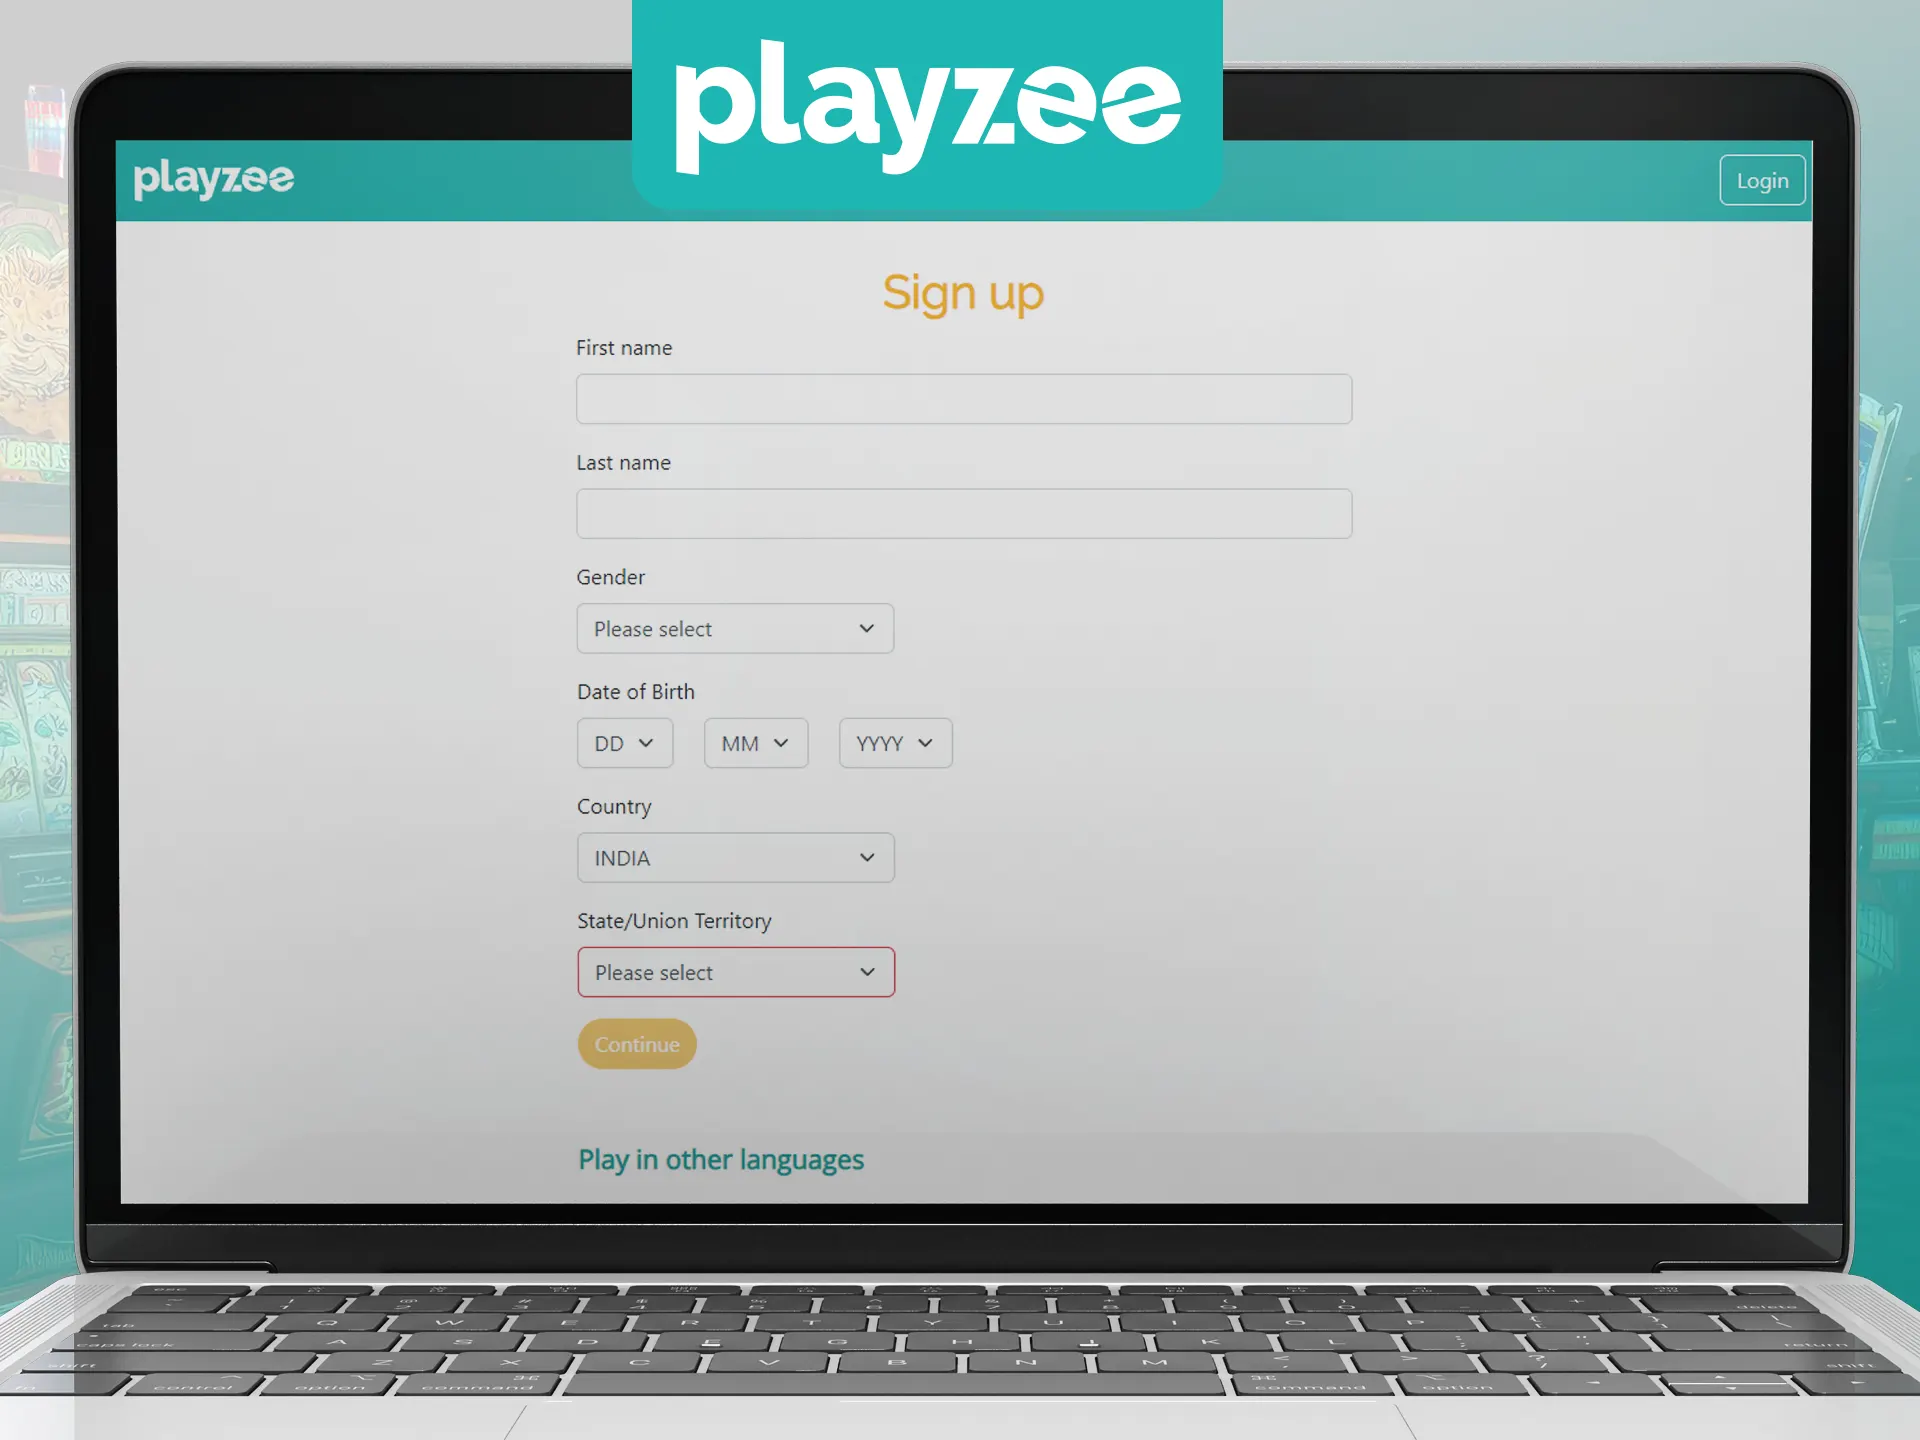 You can create an account at Playzee Casino if you fill out the registration form.